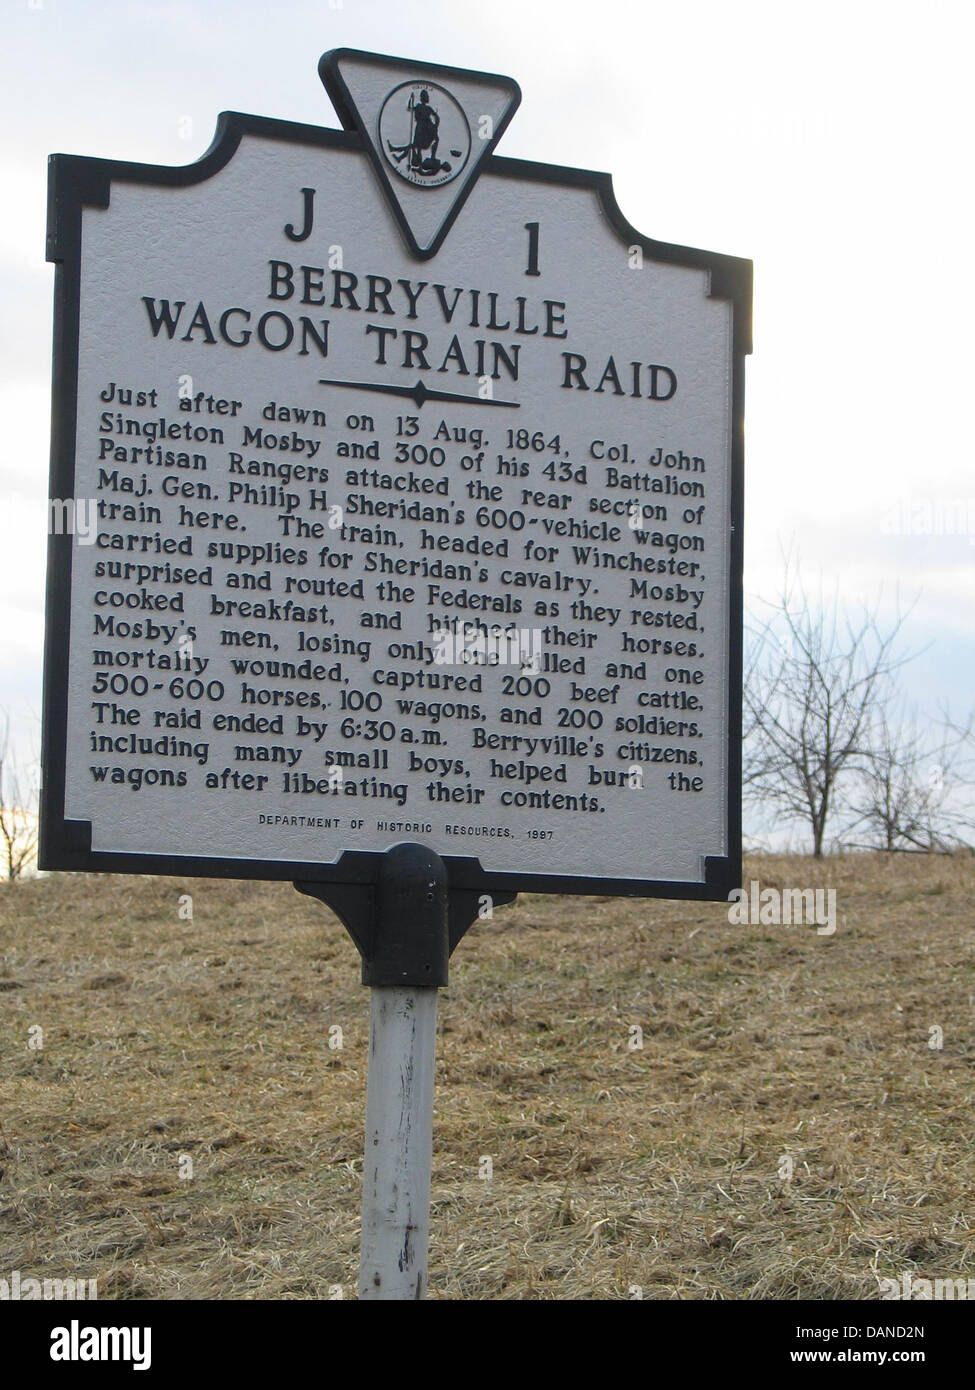 BERRYVILLE WAGON TRAIN RAID  Just after dawn on 13 Aug. 1864, Col. John Singleton Mosby and 300 of his 43d Battalion Partisan Ra Stock Photo